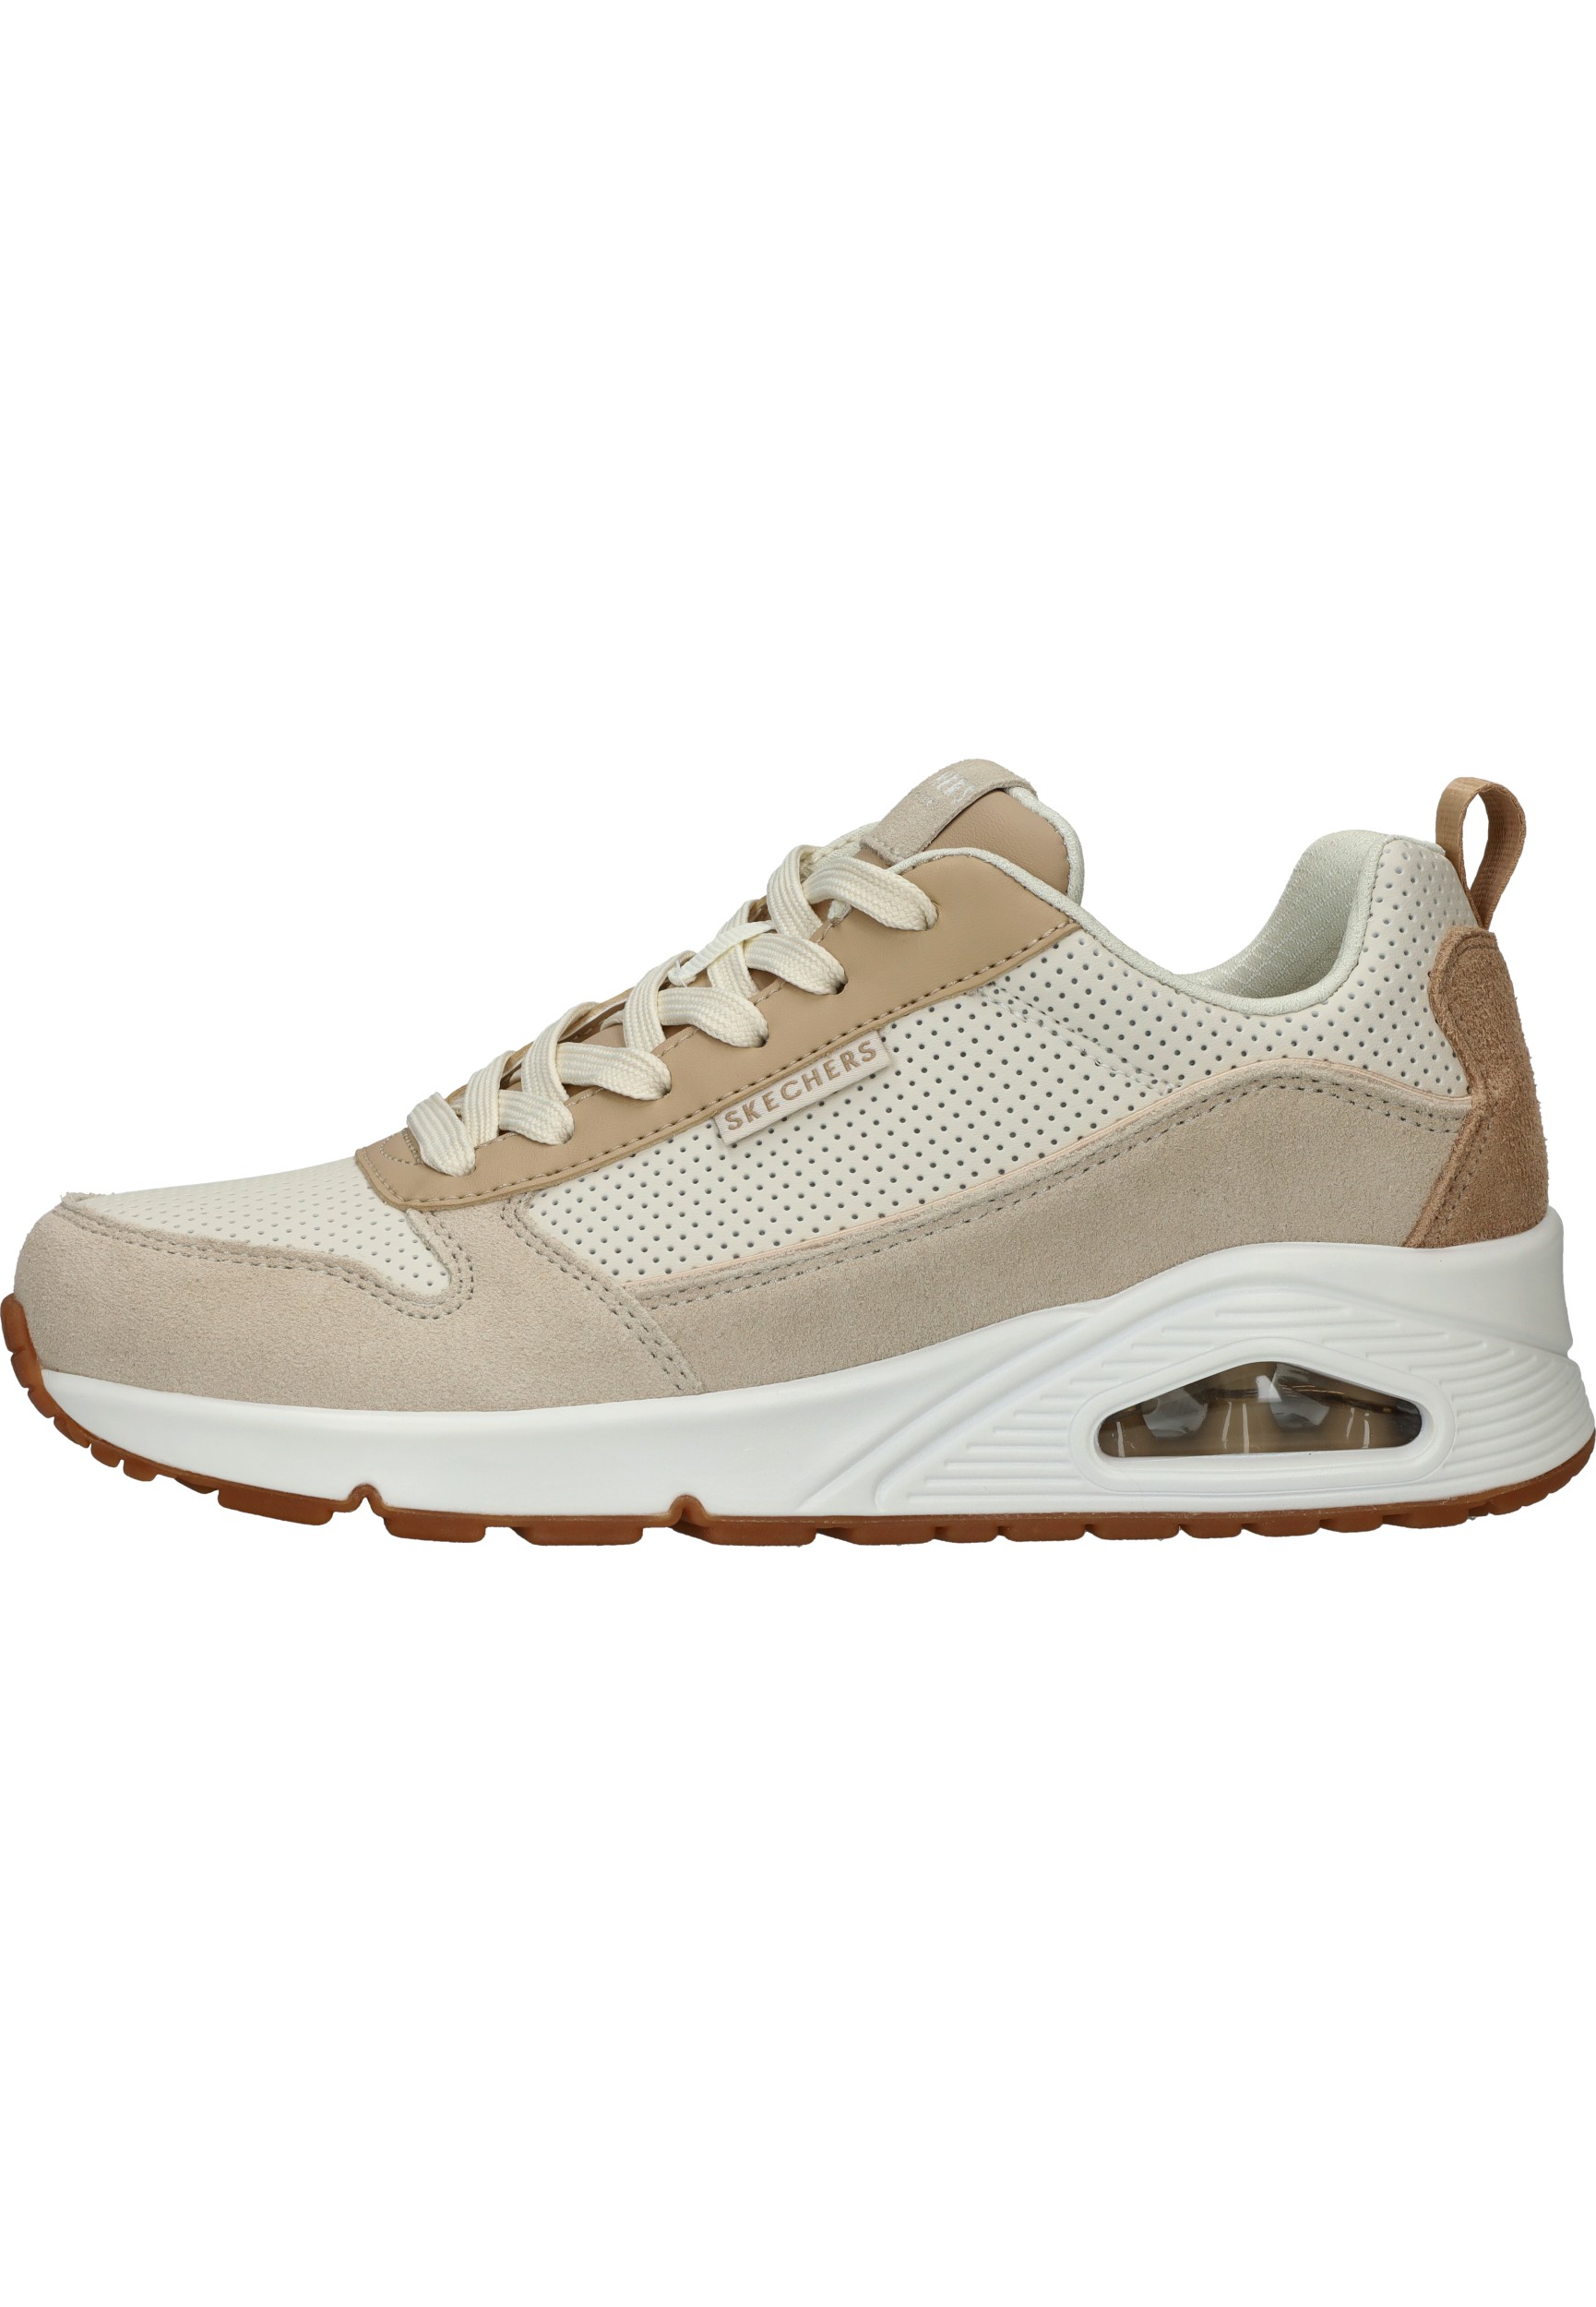 "Skechers Uno - Two Much Fun Dames Sneakers - Taupe;Zand - Maat 36"